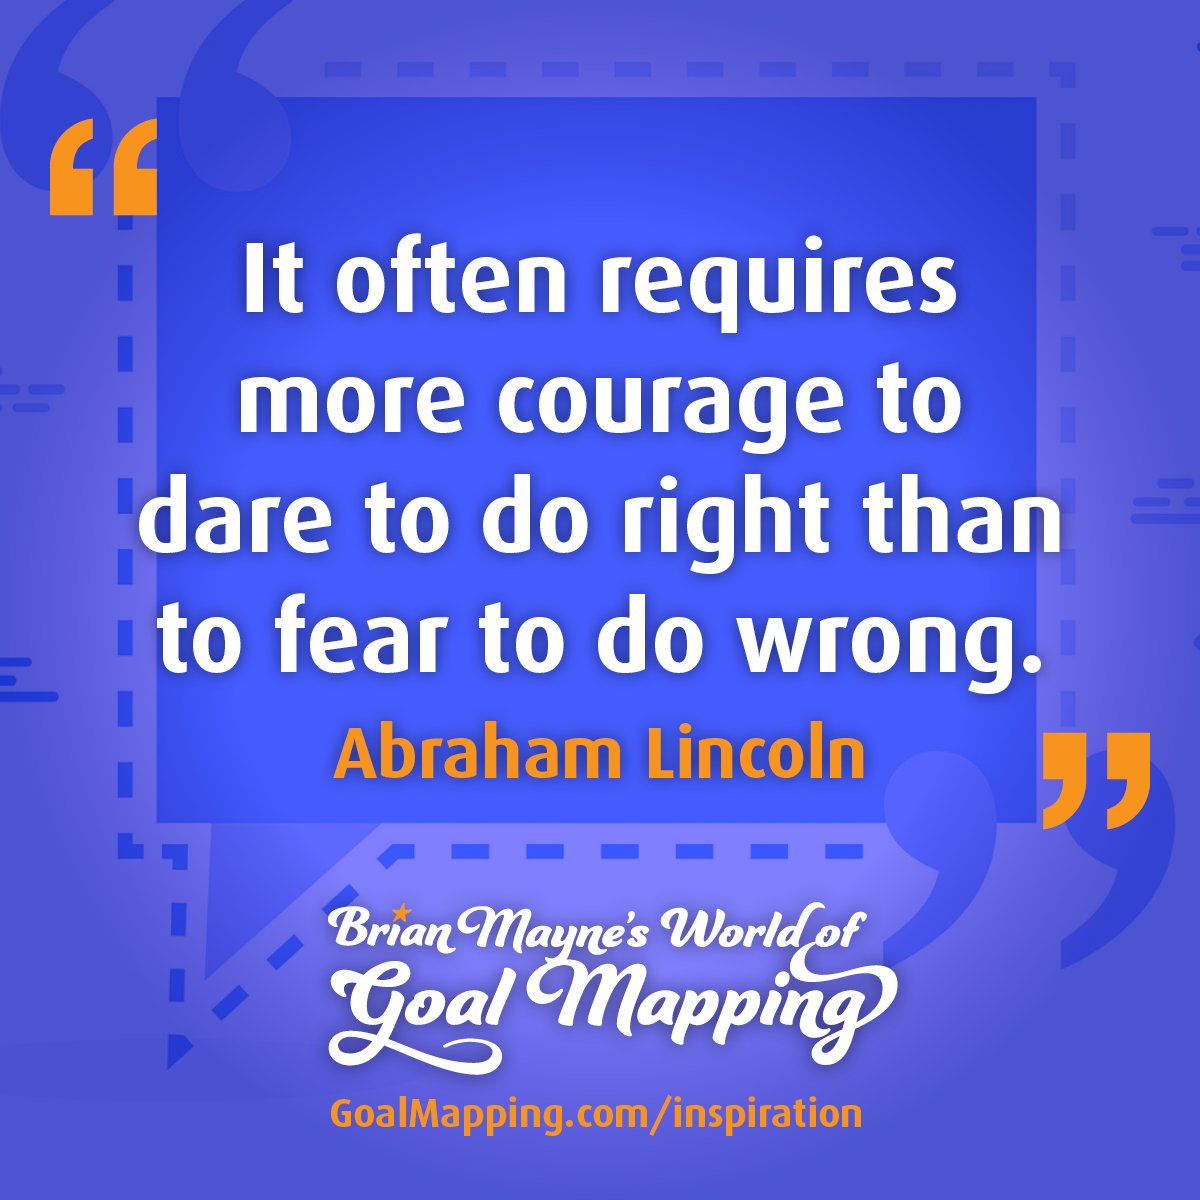 "It often requires more courage to dare to do right than to fear to do wrong." Abraham Lincoln